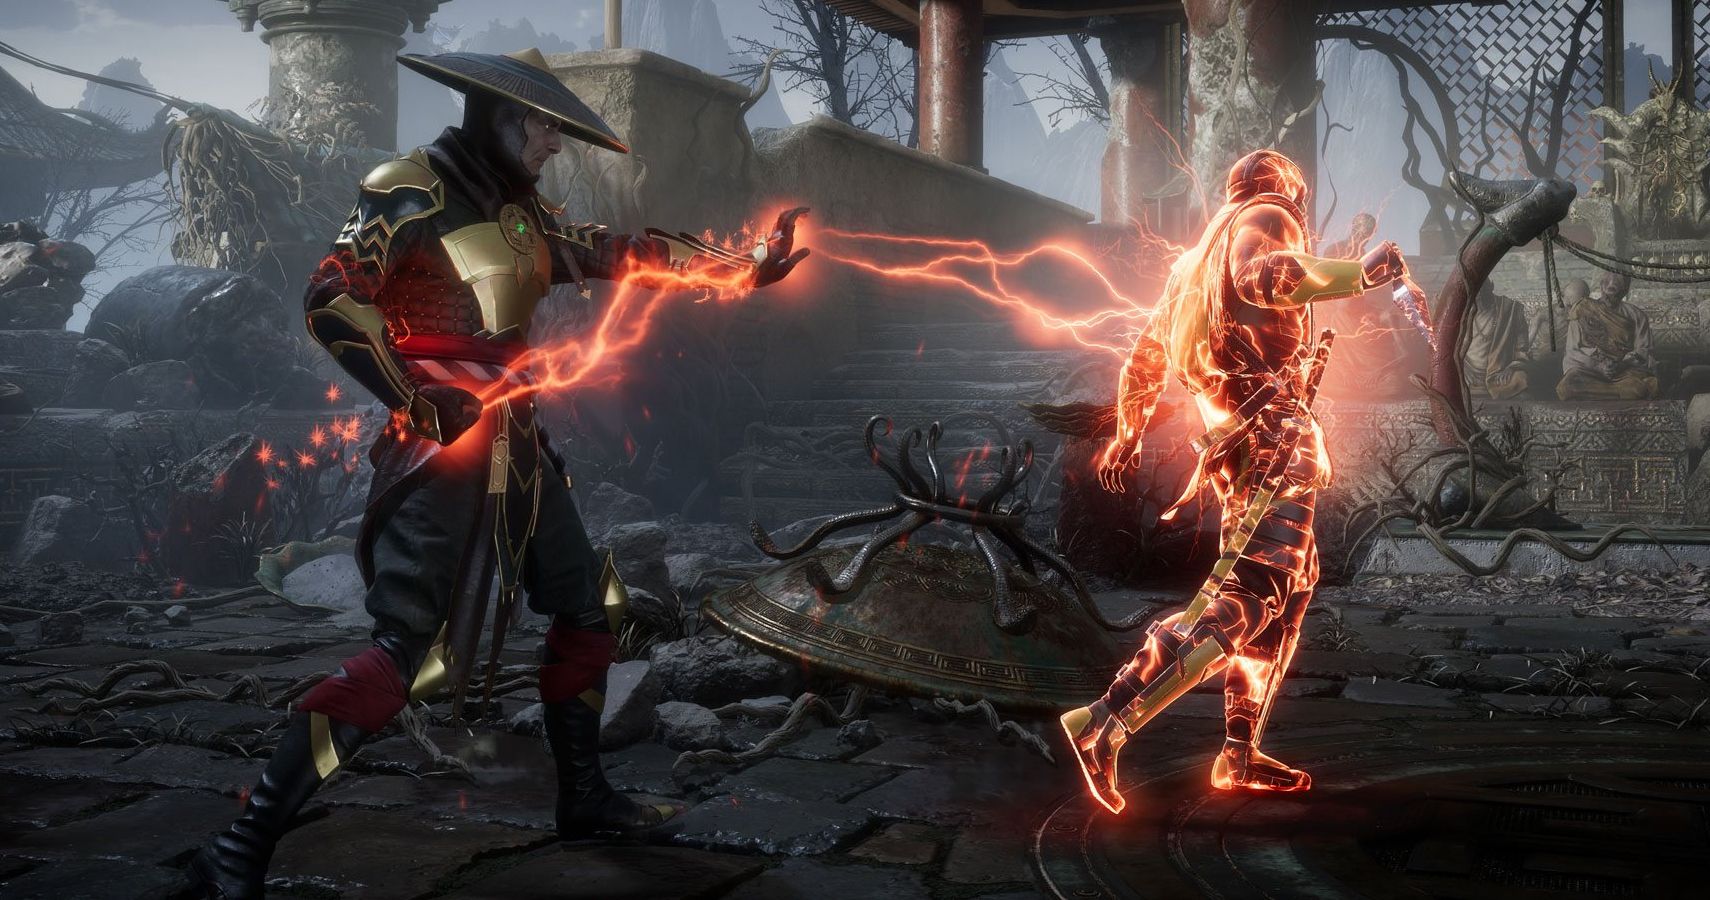 Top Ranking Mortal Kombat 11 Player Cheated Their Way To The Top (And Theyre Still Getting Away With It)